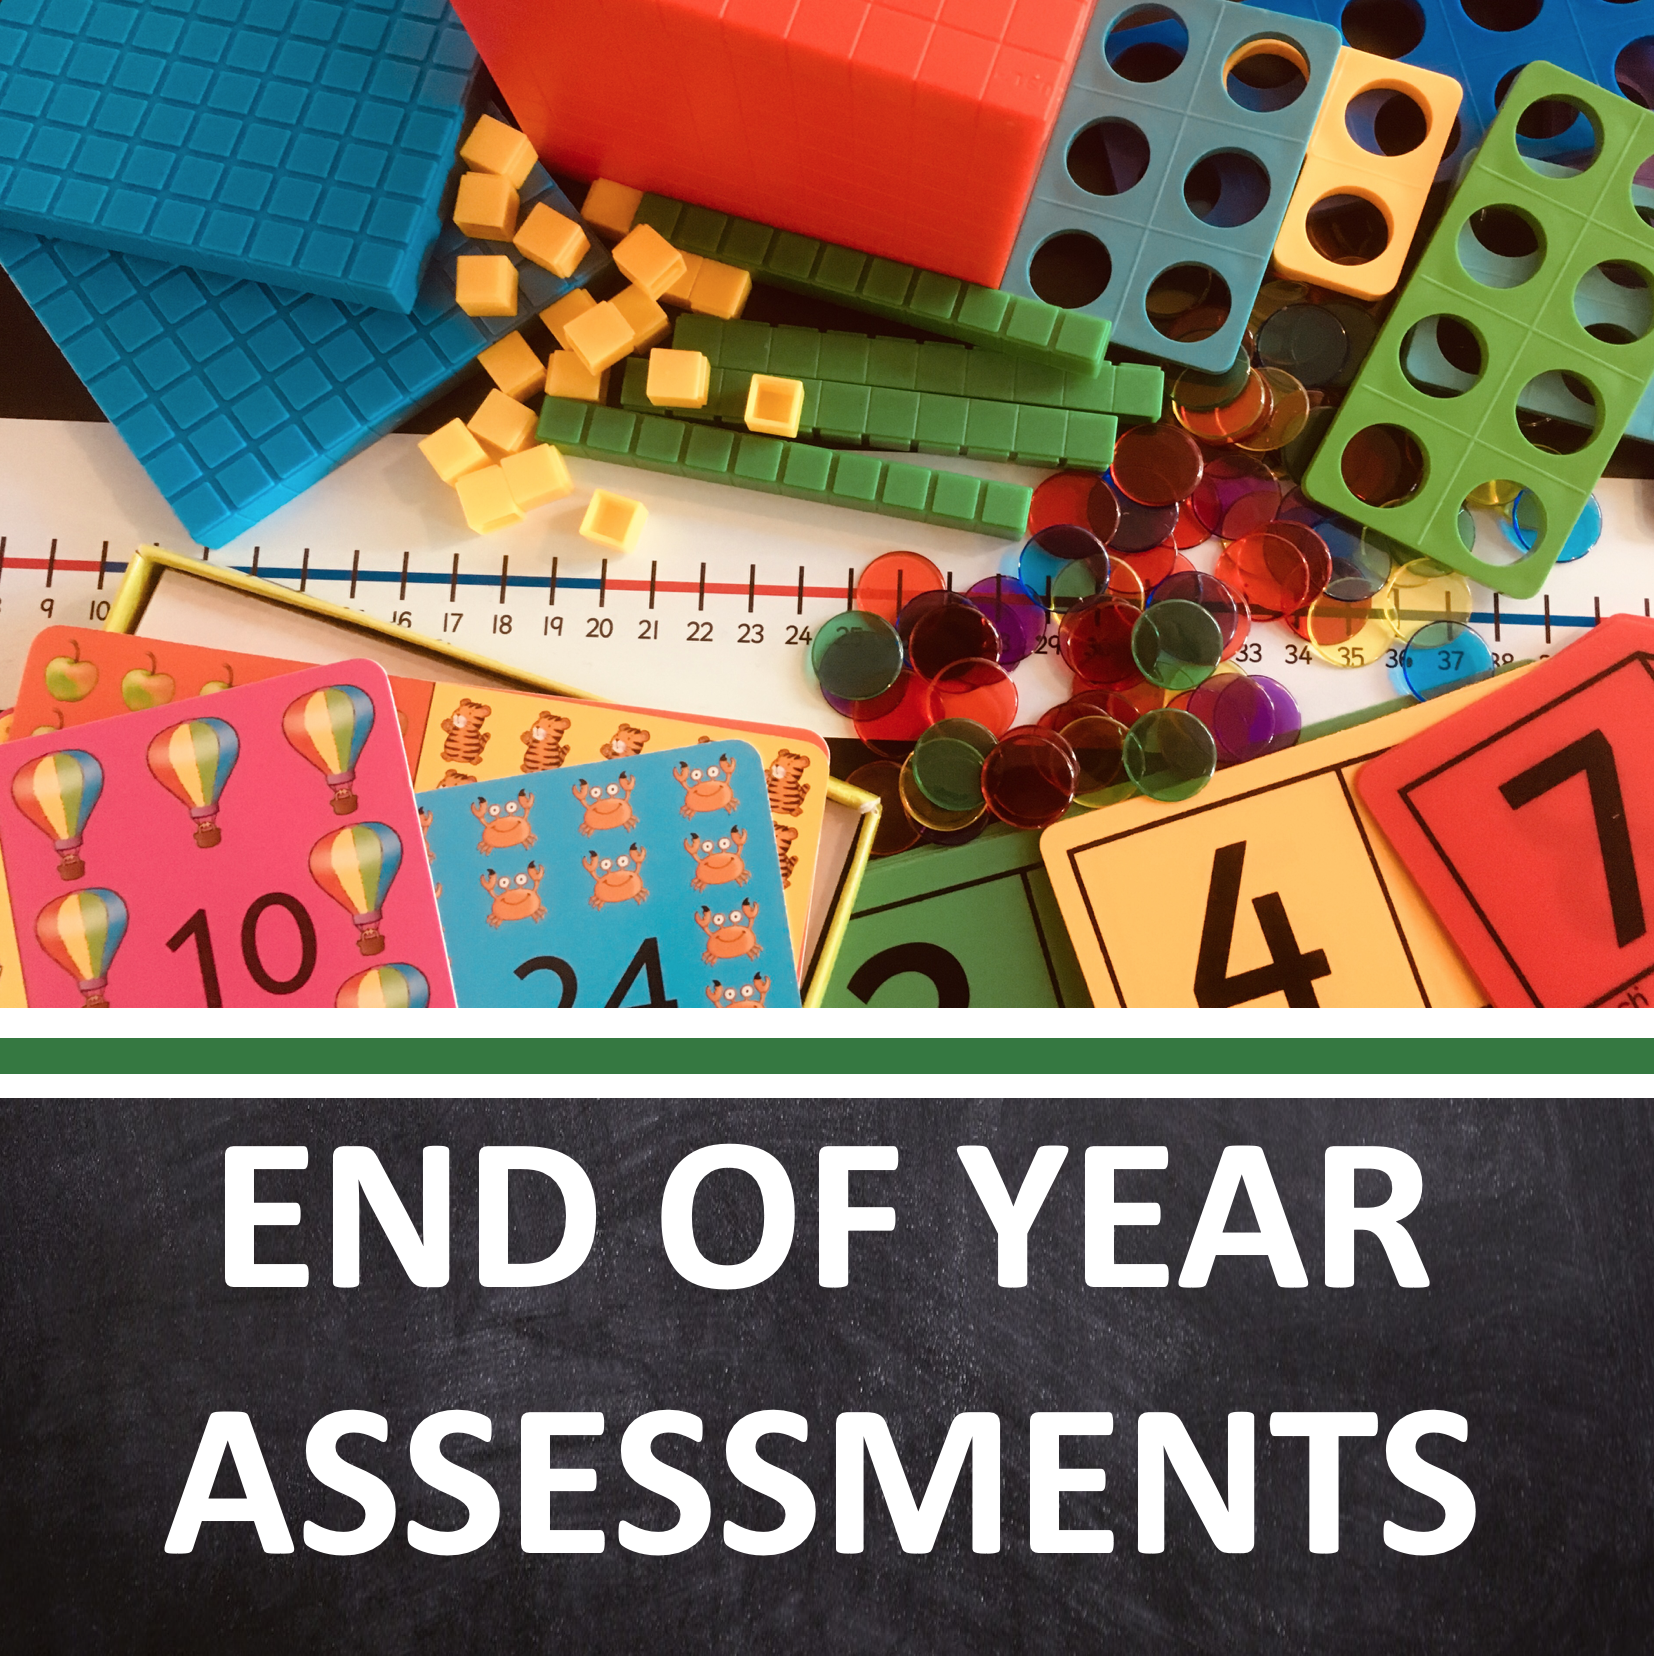 End of Year Assessments (Reception to Year 6)